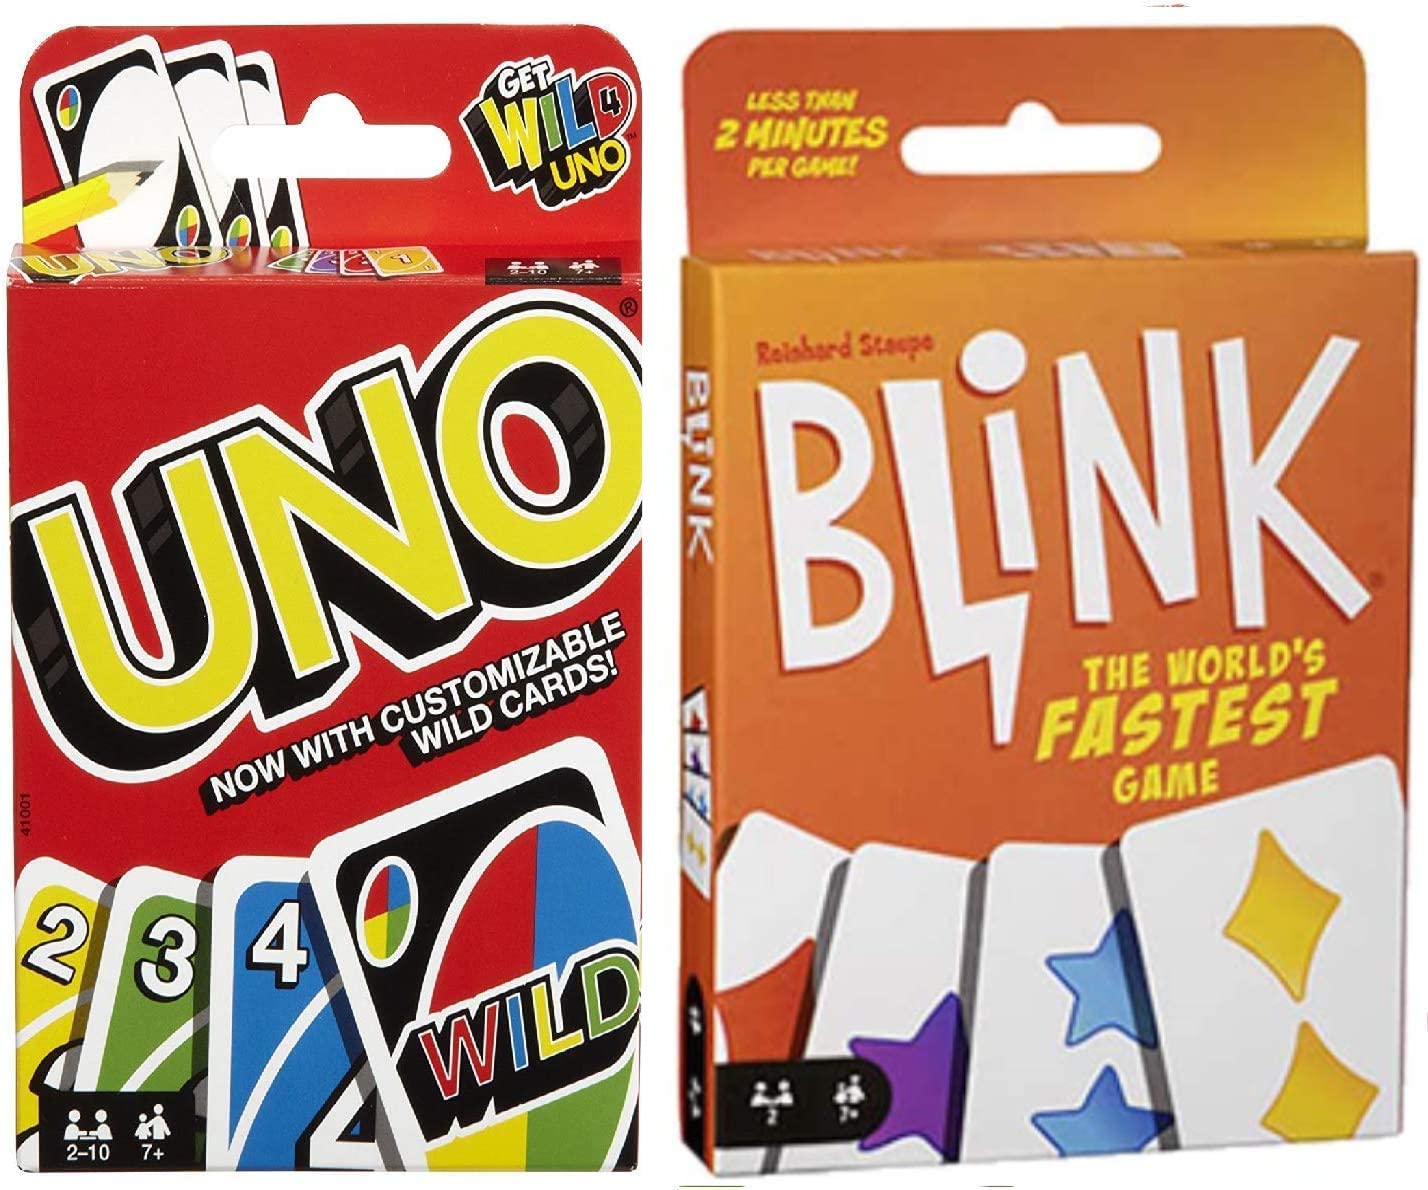 blink and uno